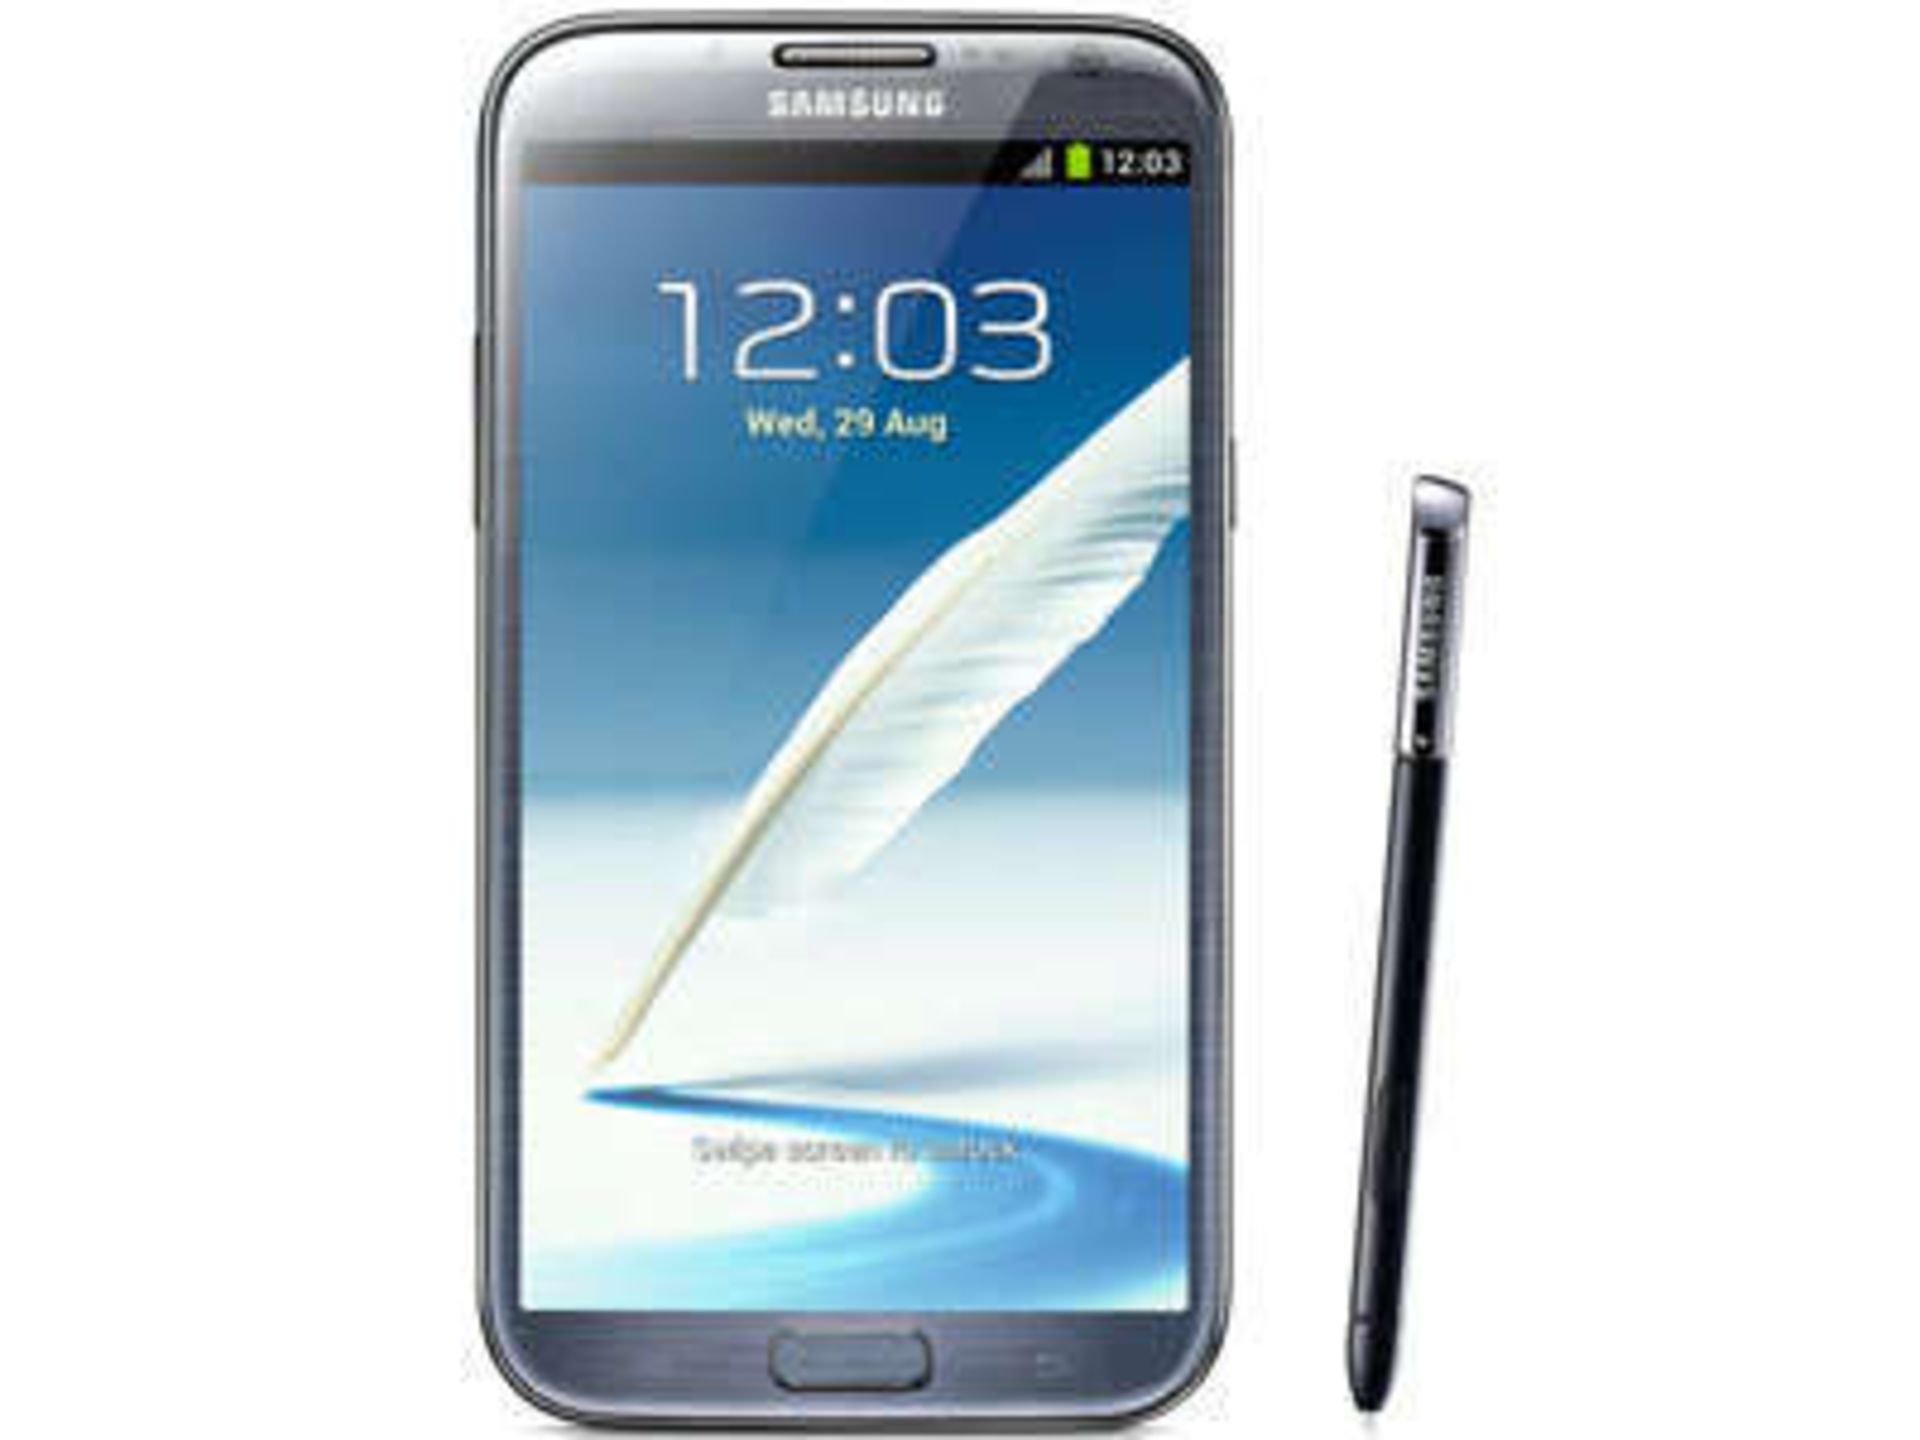 Grade A Samsung Note 2(N7100) Colours May Vary - Item Available After Approx 15 Working Days After